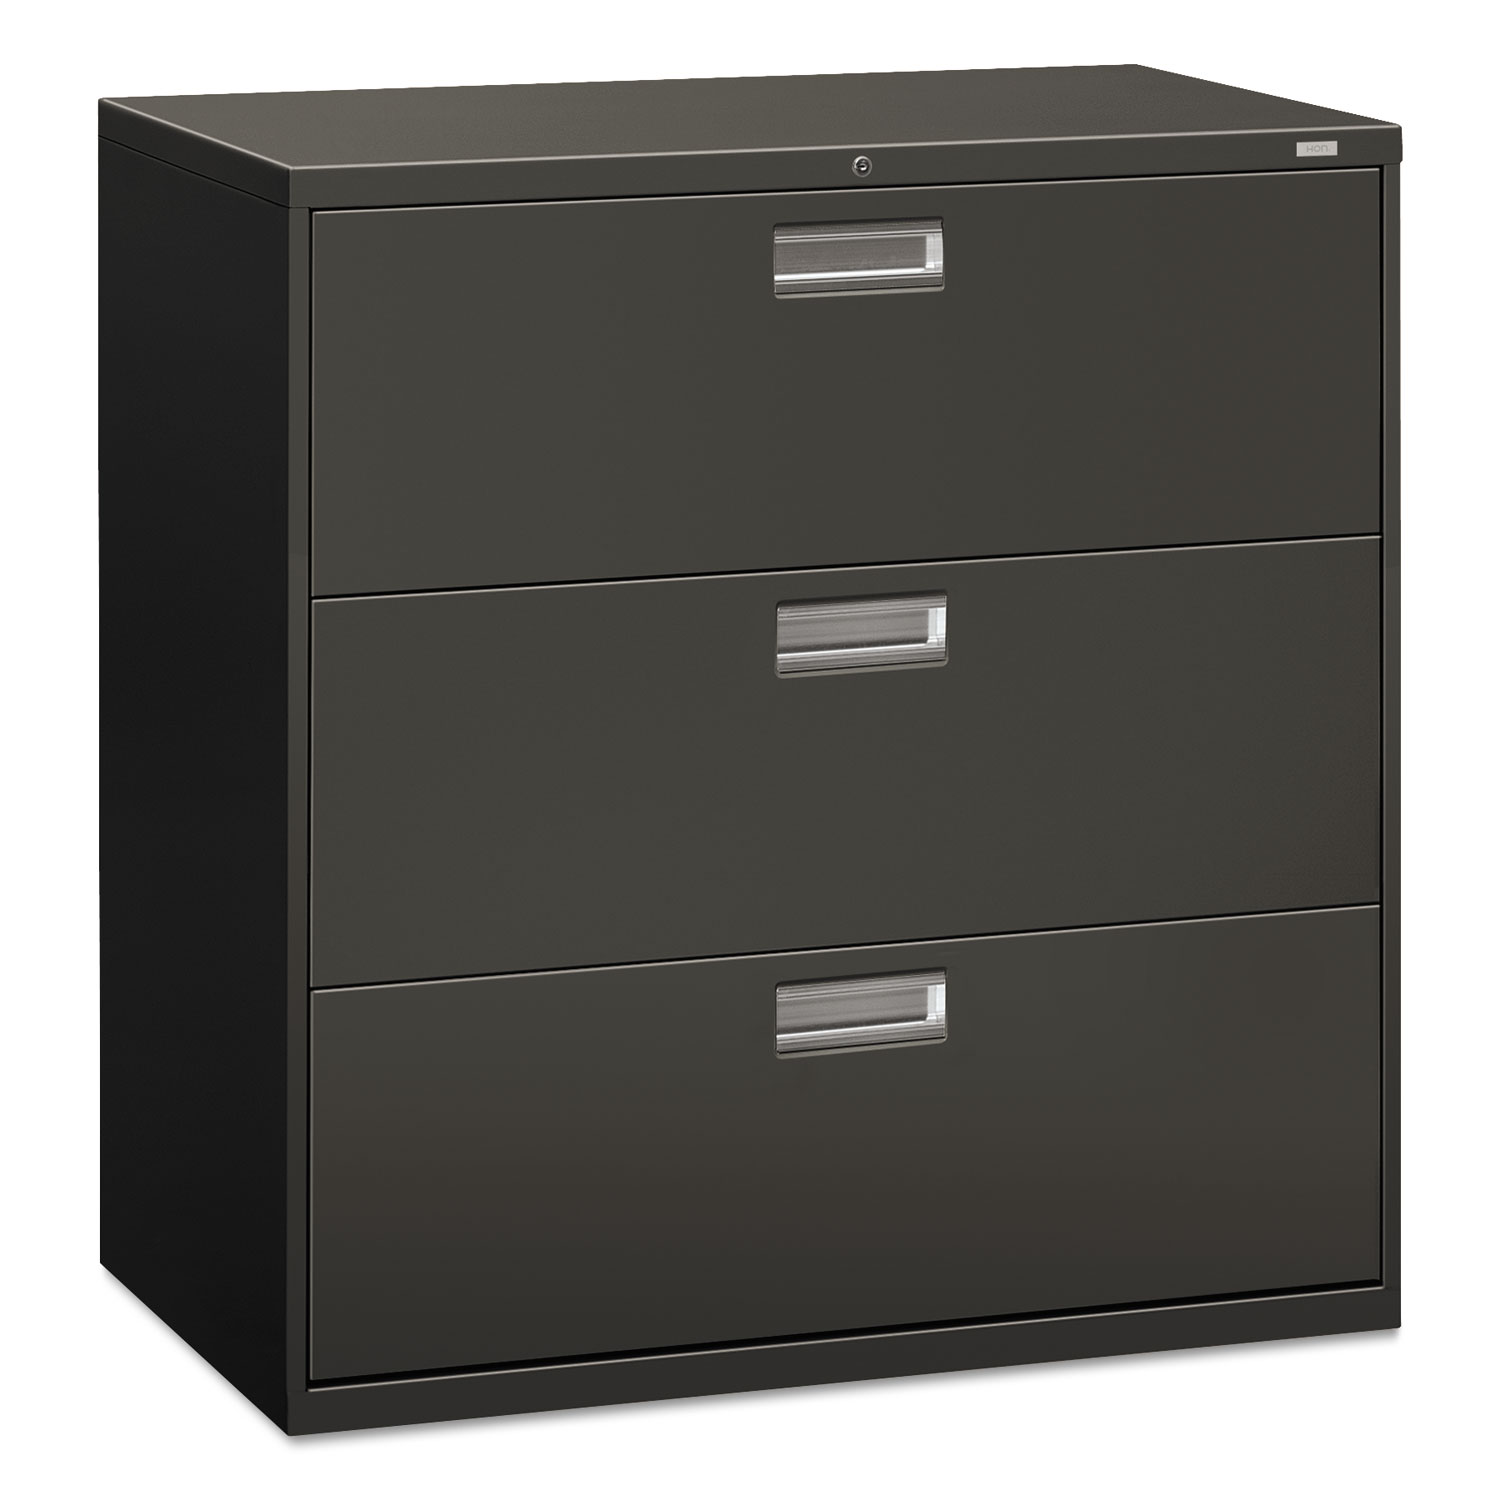 600 Series Three-Drawer Lateral File, 42w x 19-1/4d, Charcoal